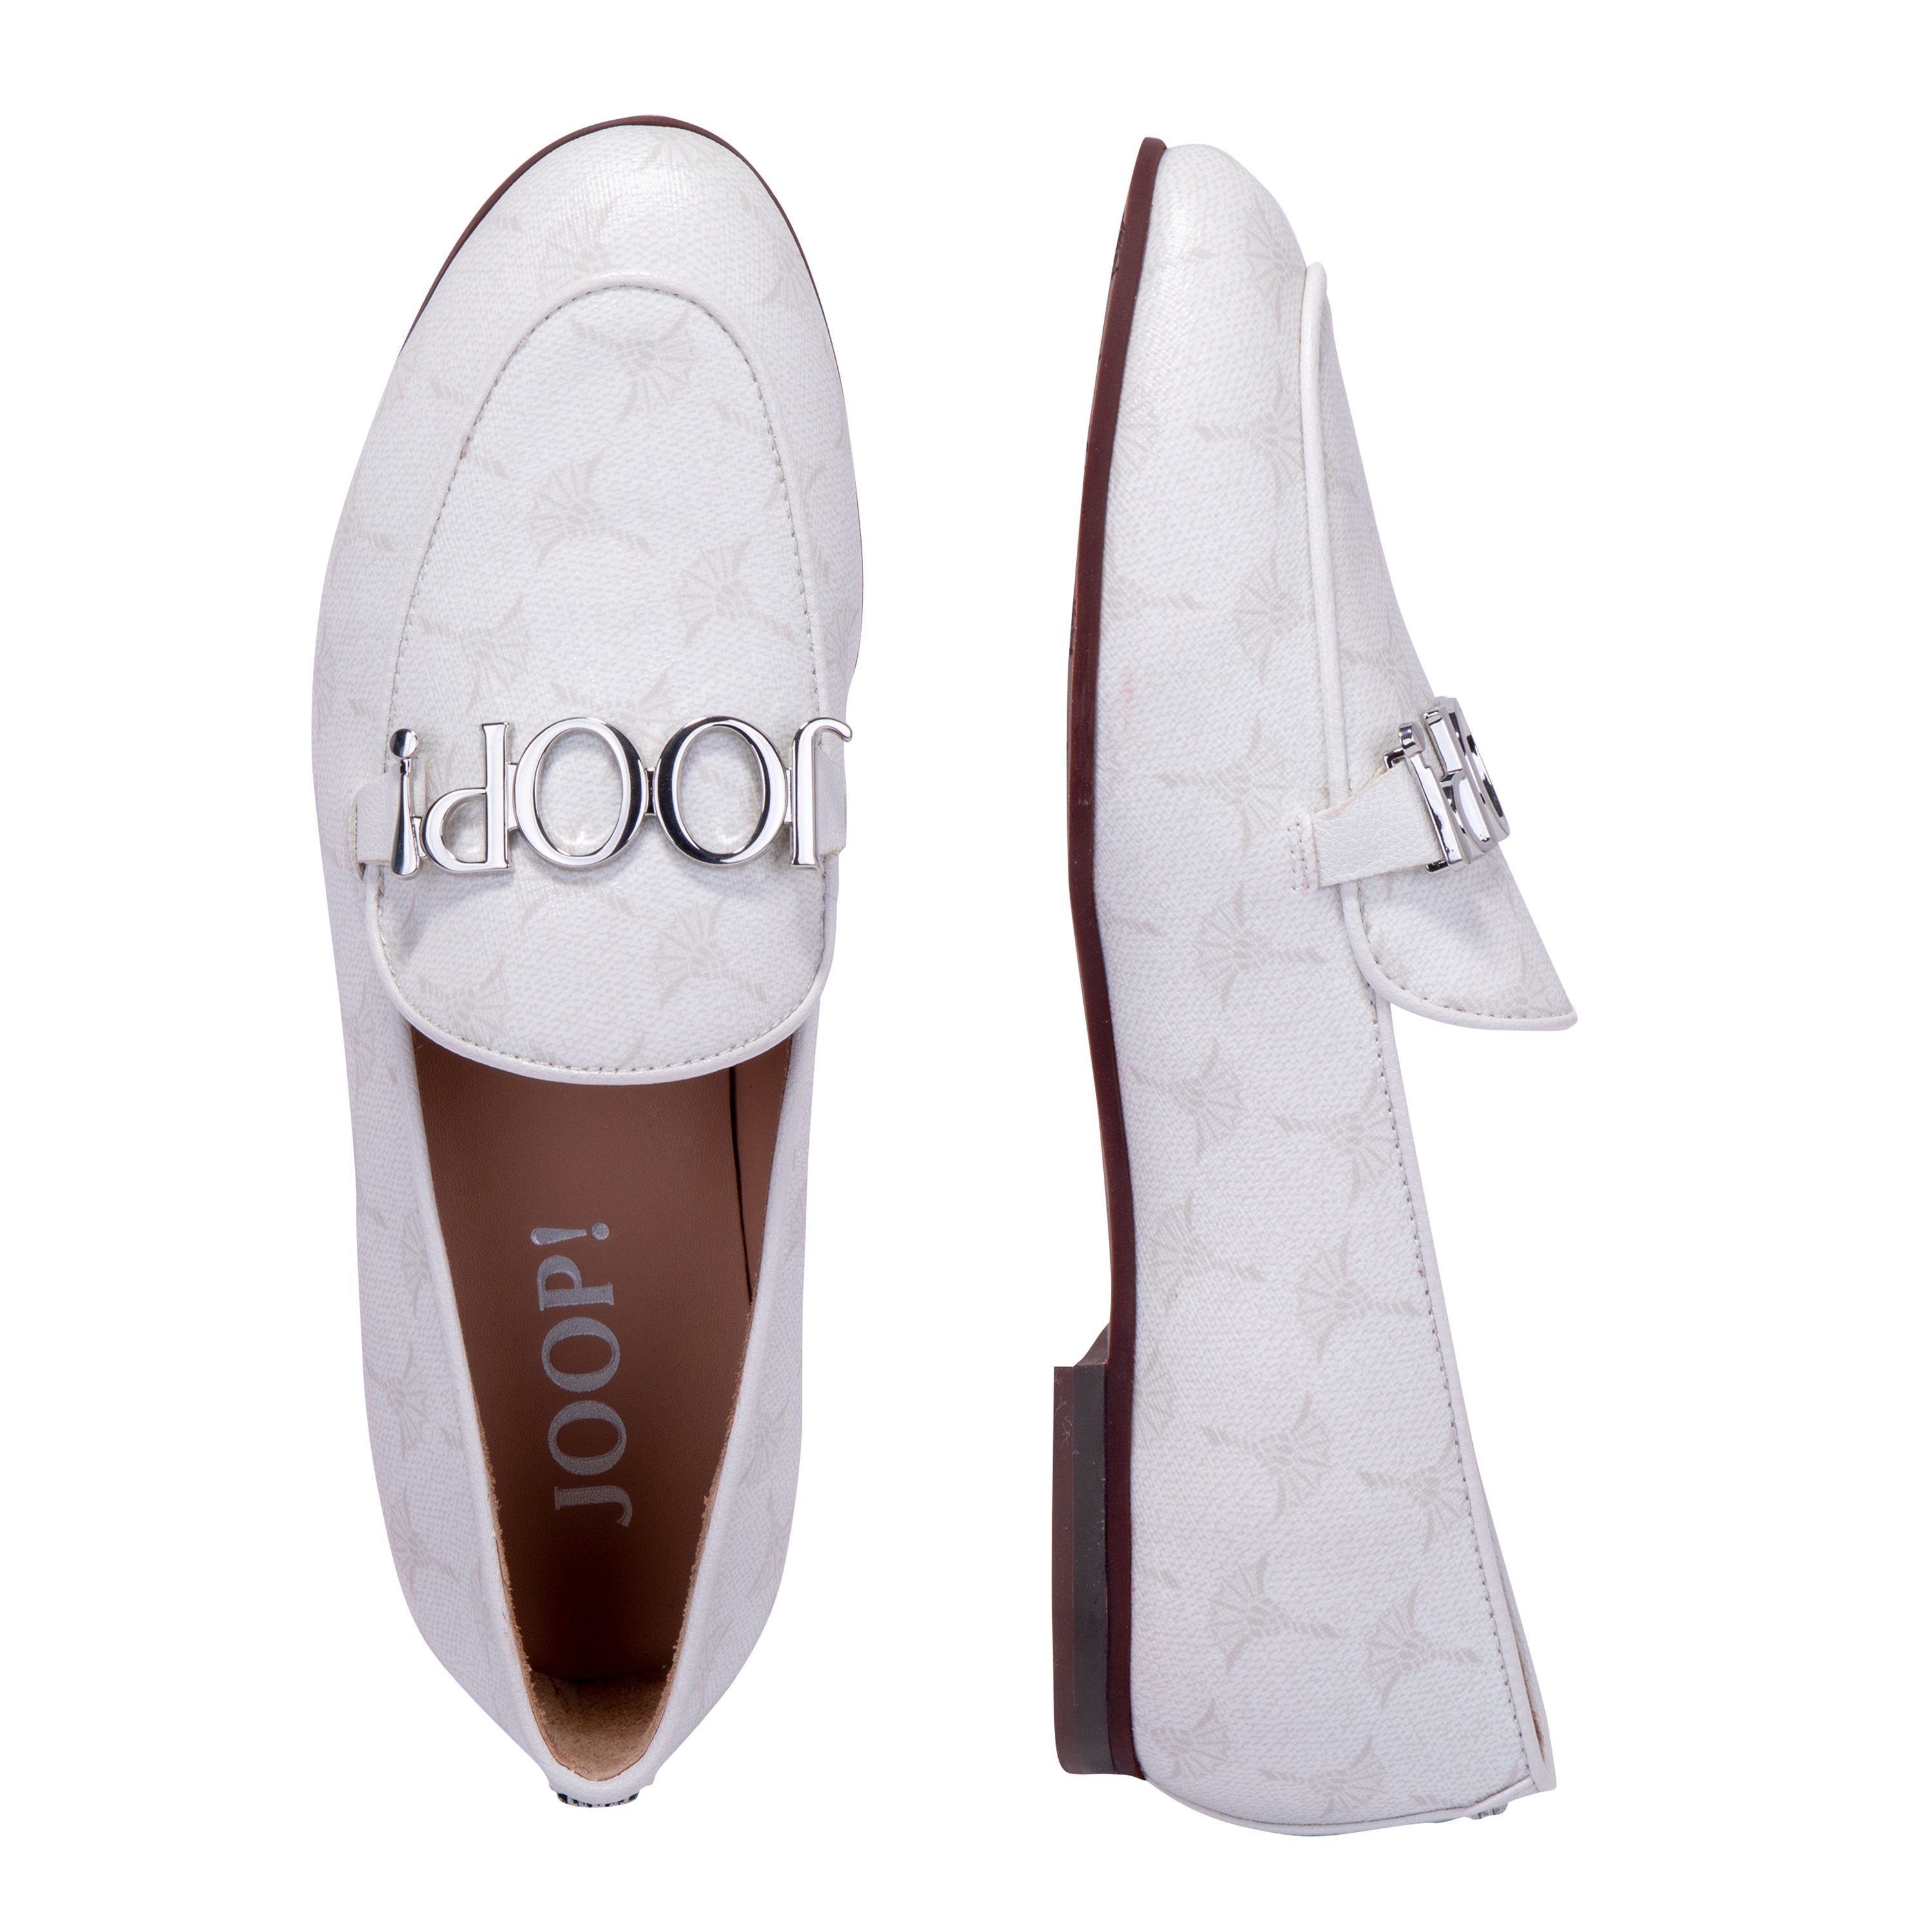 Joop! Slipper synthetic, outer: microfibre inner: offwhite